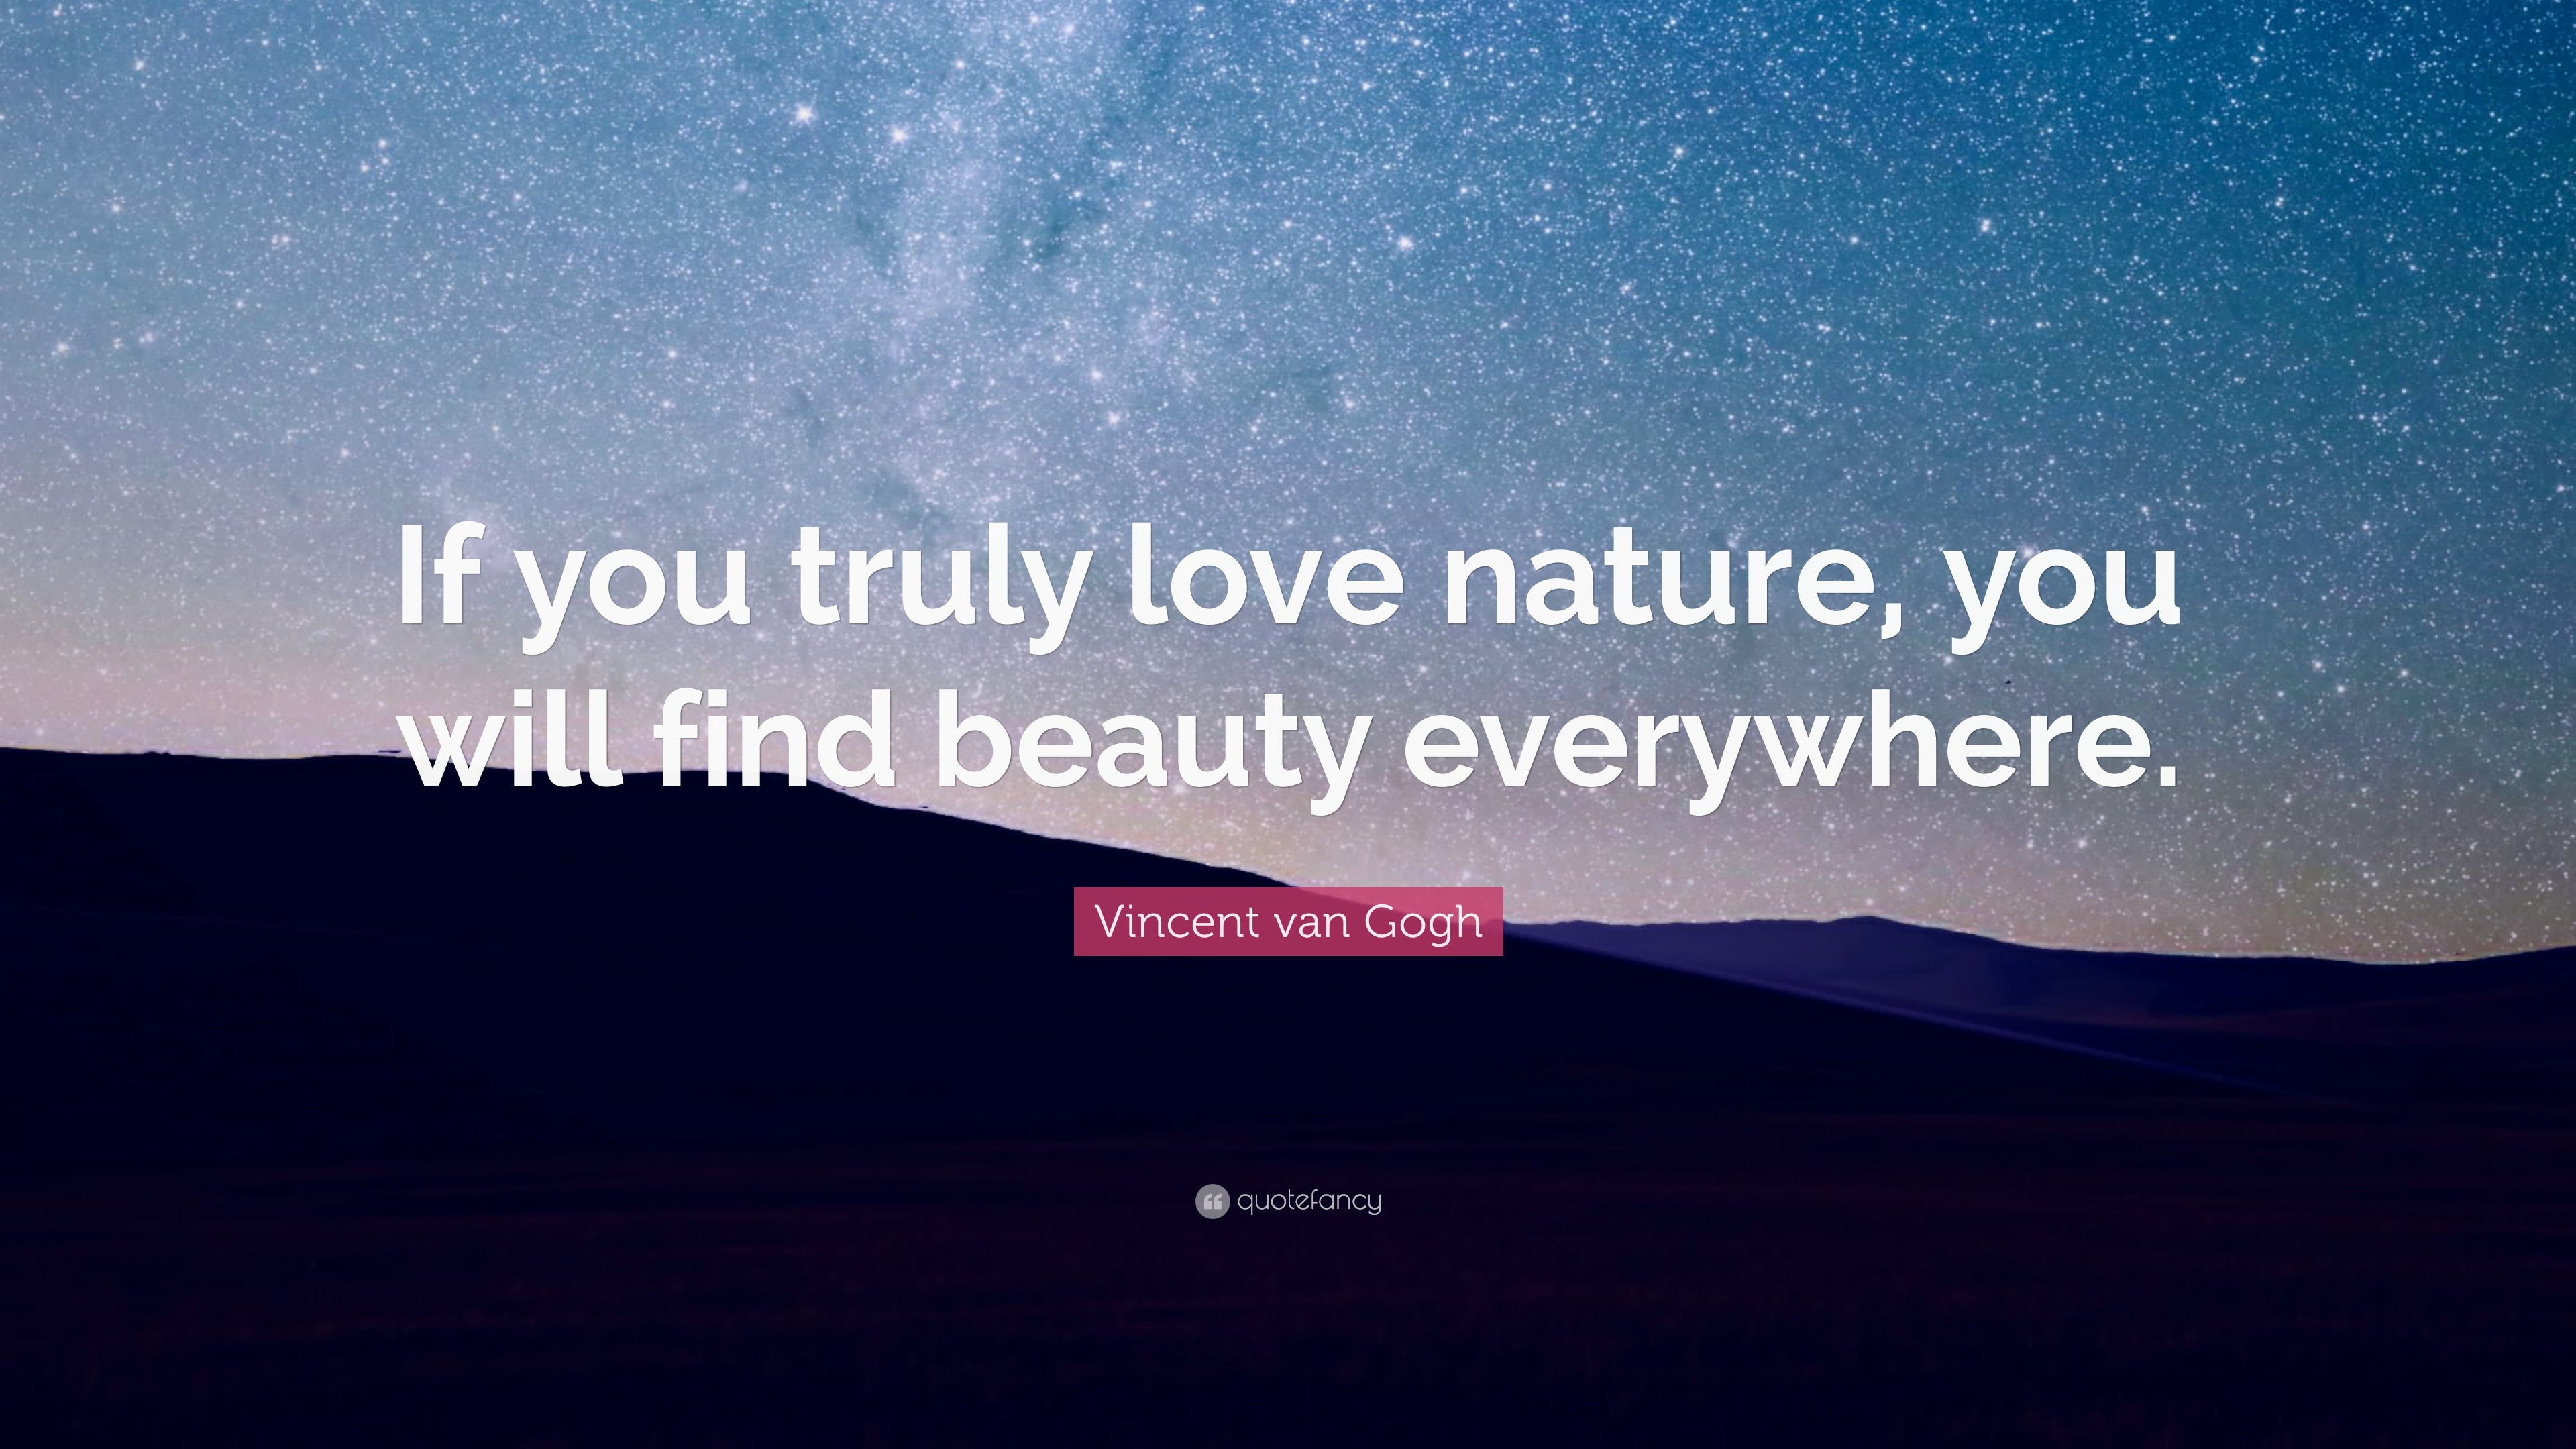 Vincent van Gogh Quote: “If you truly love nature, you will find beauty ...